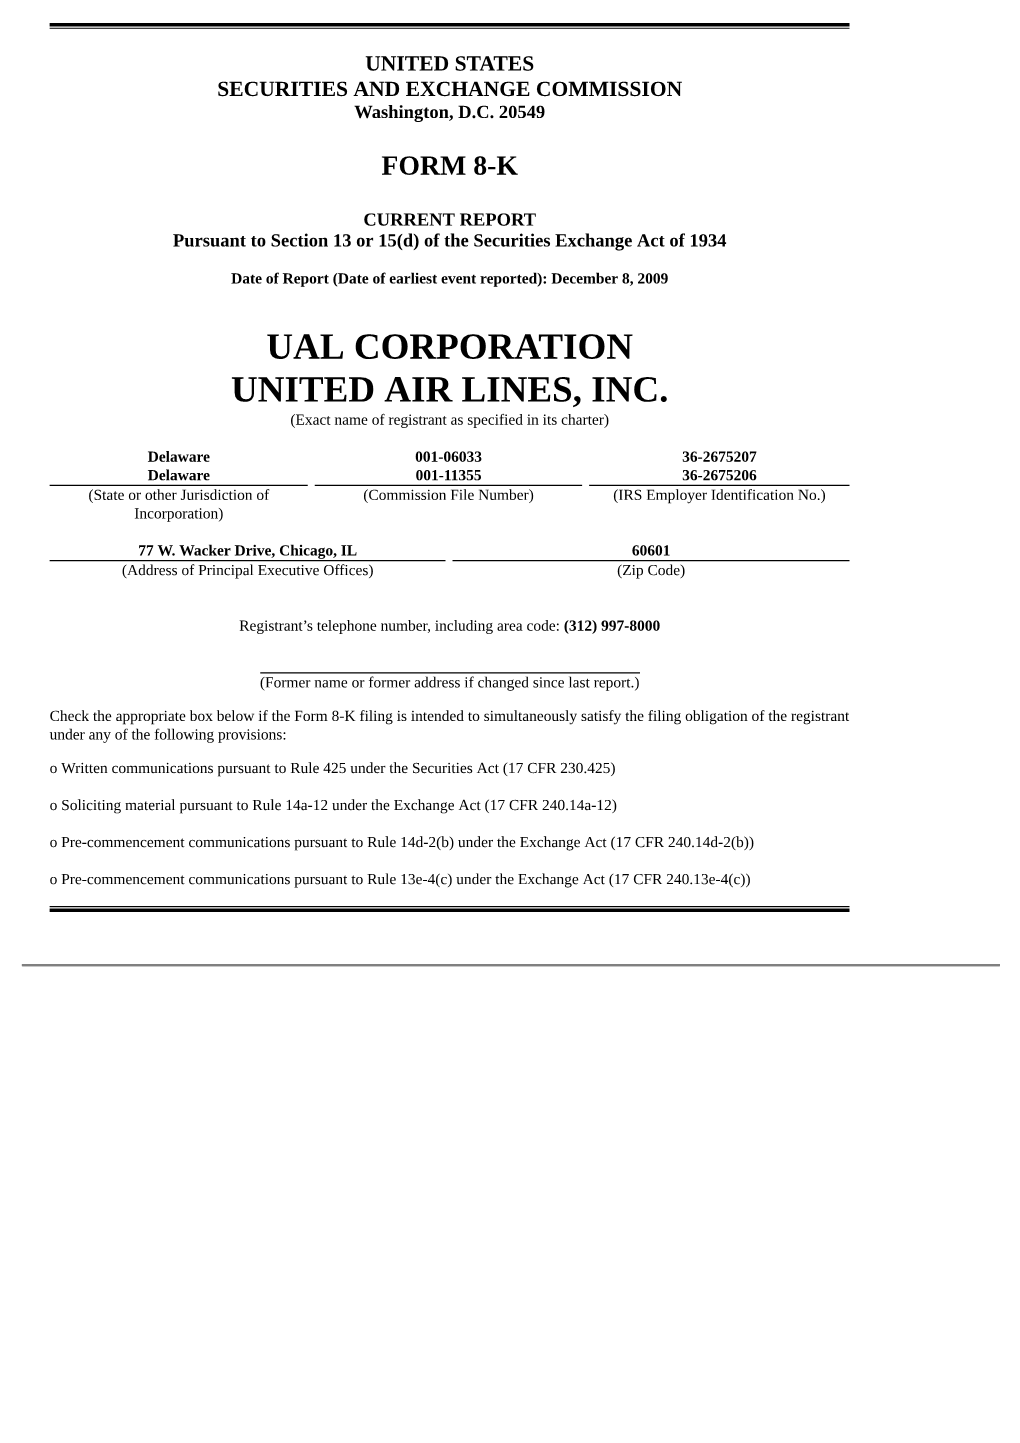 UAL CORPORATION UNITED AIR LINES, INC. (Exact Name of Registrant As Specified in Its Charter)